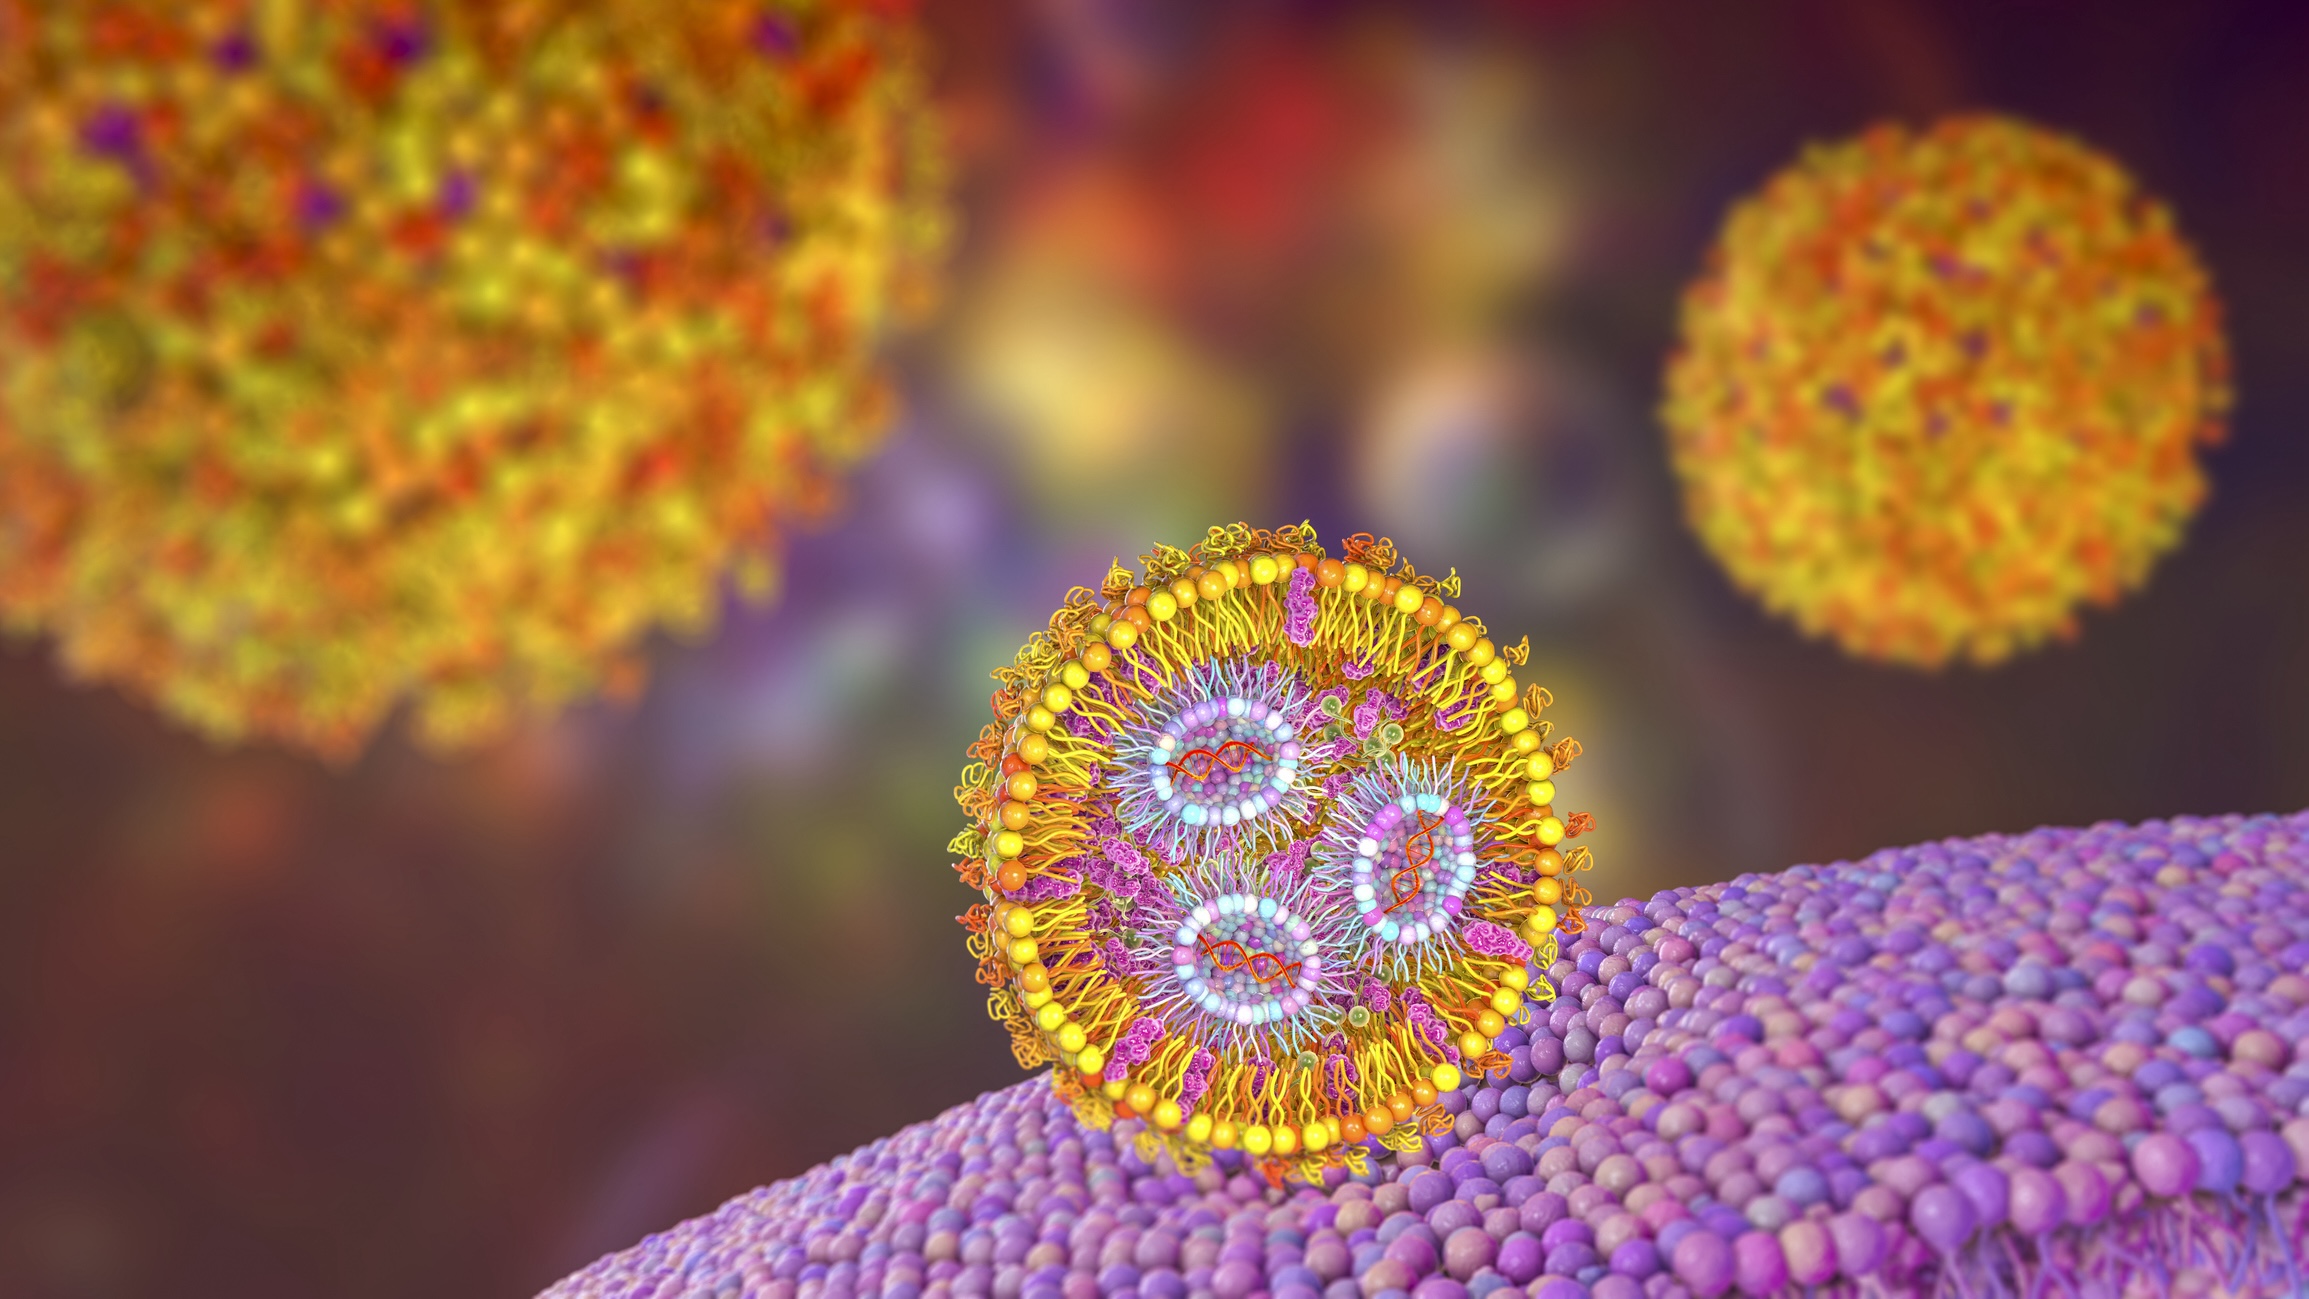 3D illustration showing cross-section of the lipid nanoparticle carrying mRNA of the virus entering a human cell.